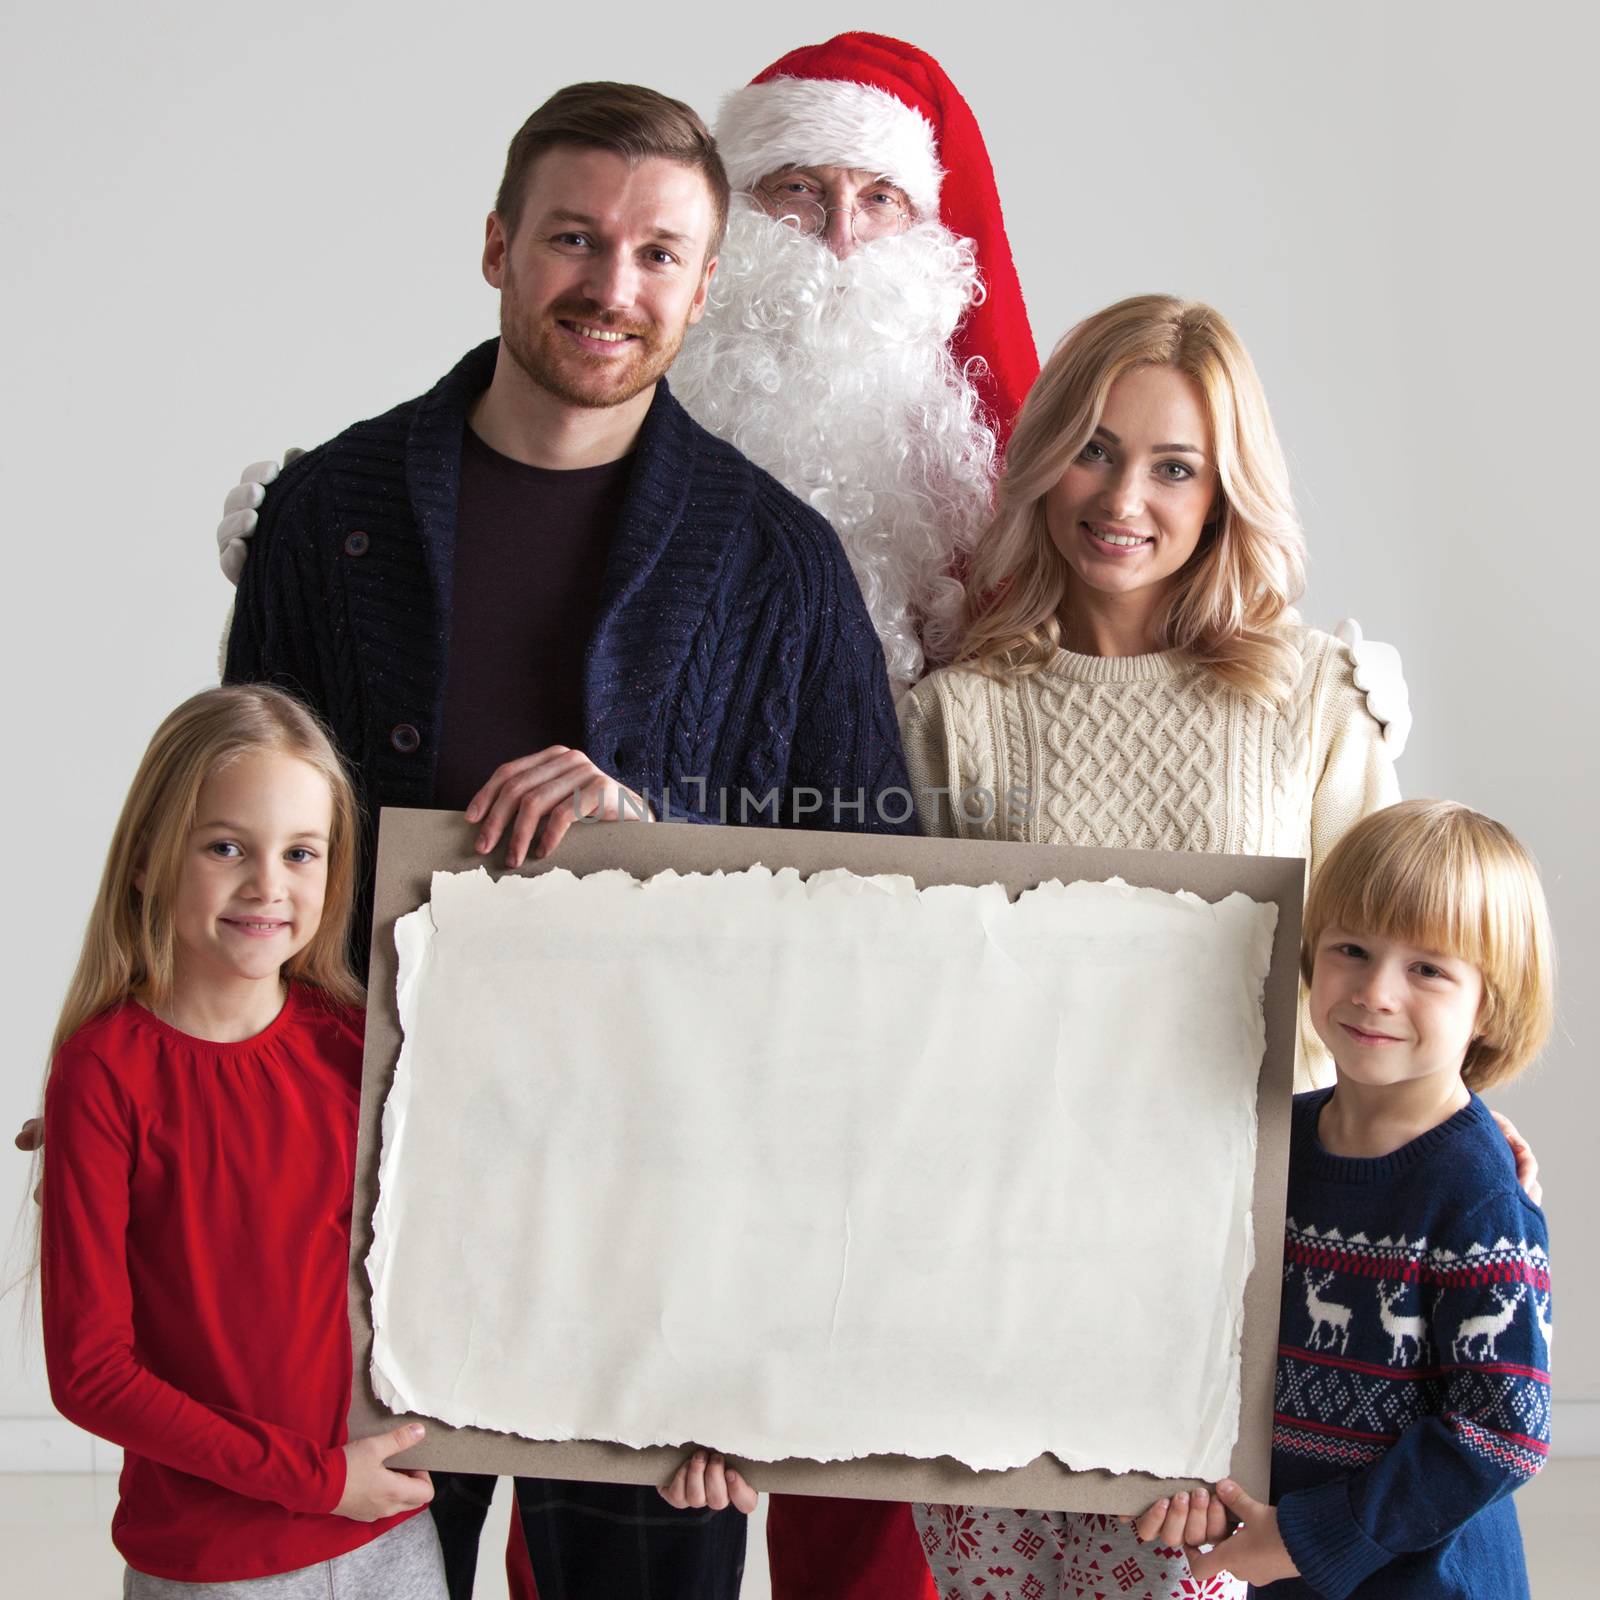 Christmas portrait of happy smiling family with two children and Santa Claus embracing them holding blank vintage paper